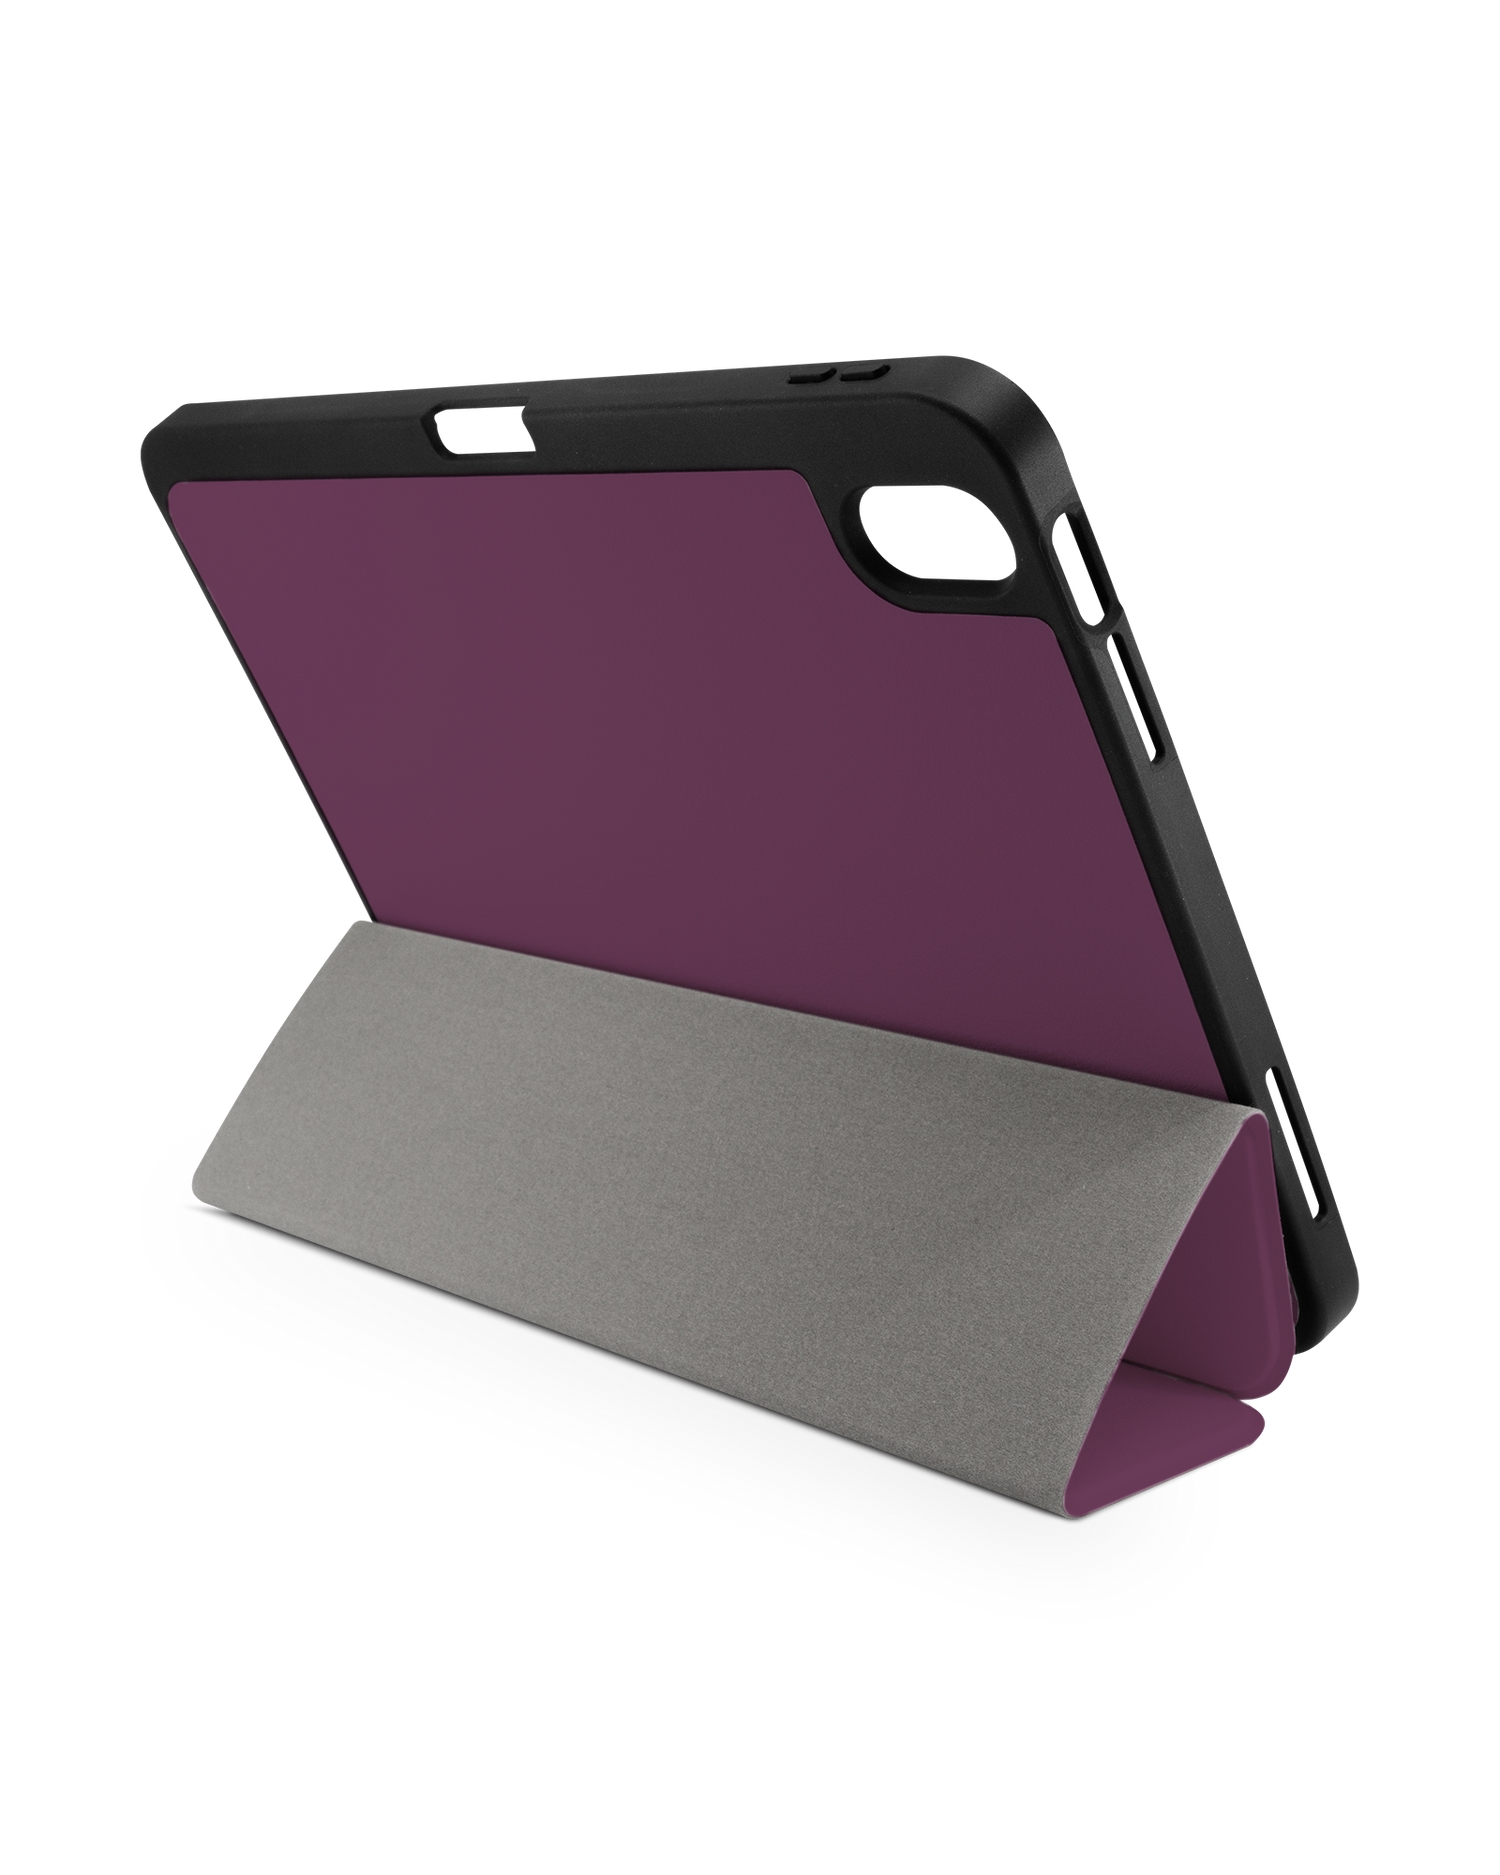 PLUM iPad Case with Pencil Holder for Apple iPad (10th Generation): Set up in landscape format (back view)